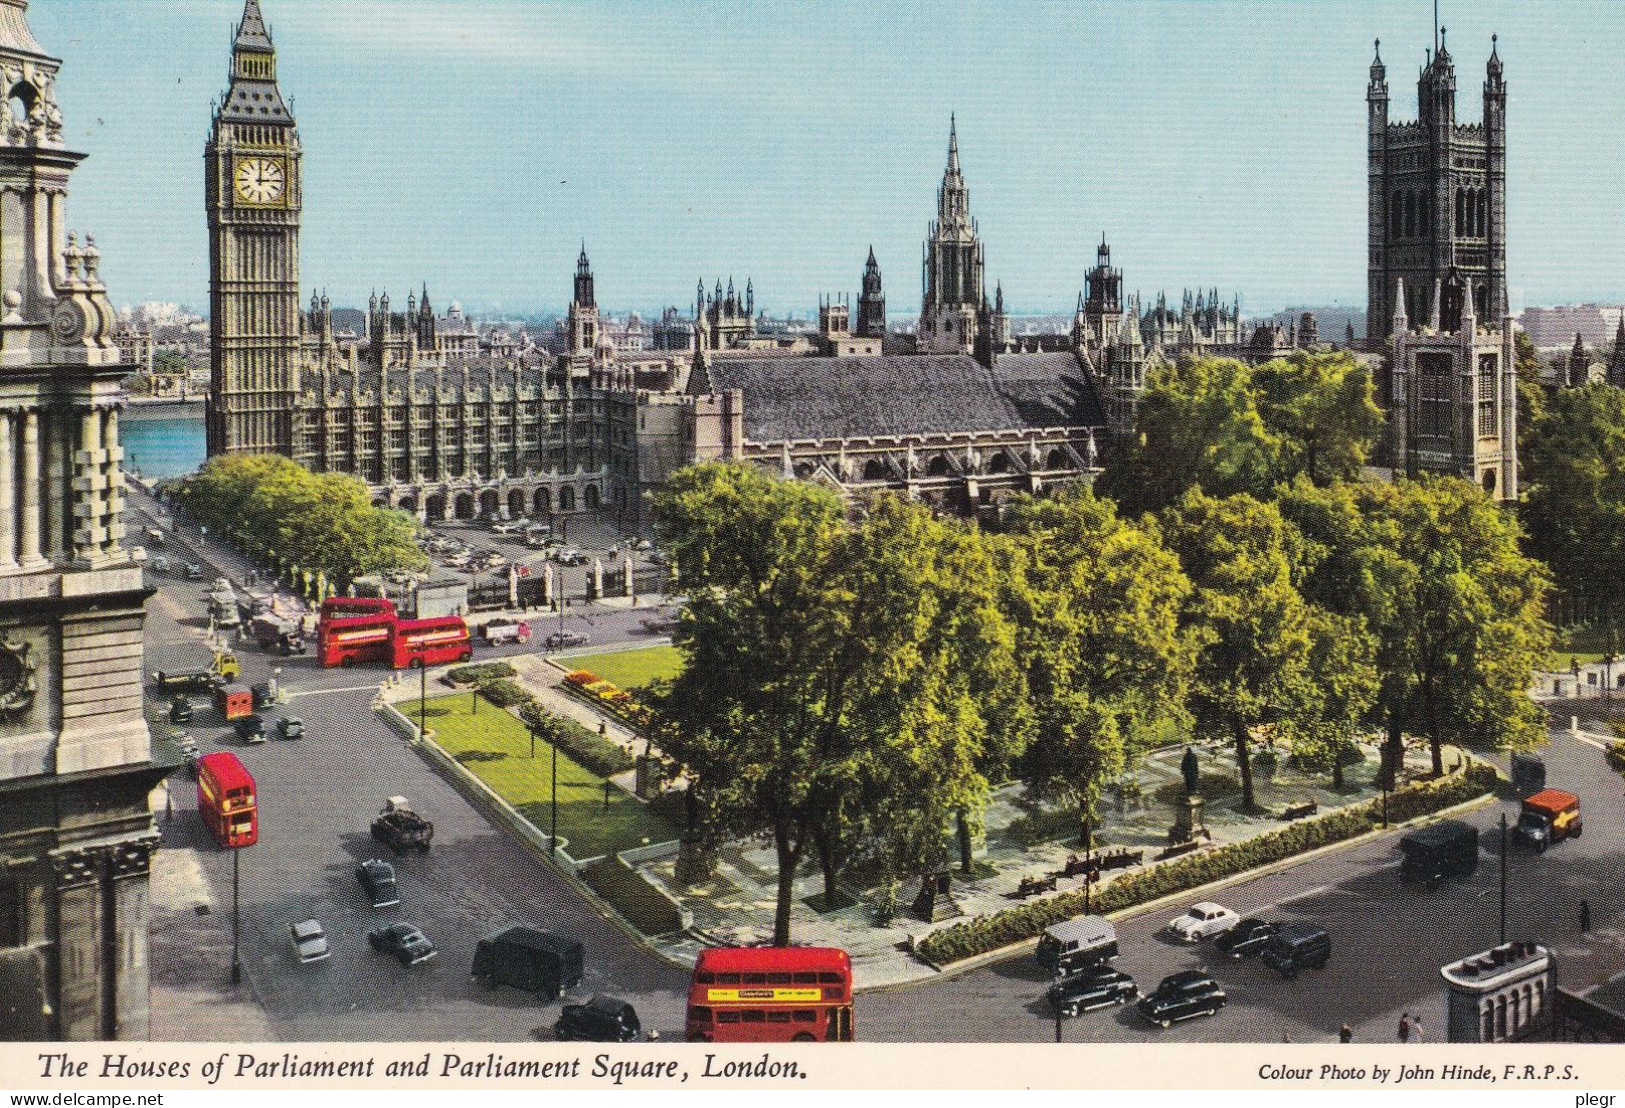 0-GBR01 01 115 - LONDON / LONDRES - THE HOUSES OF PARLIAMENT AND PARLIAMENT SQUARE - Houses Of Parliament